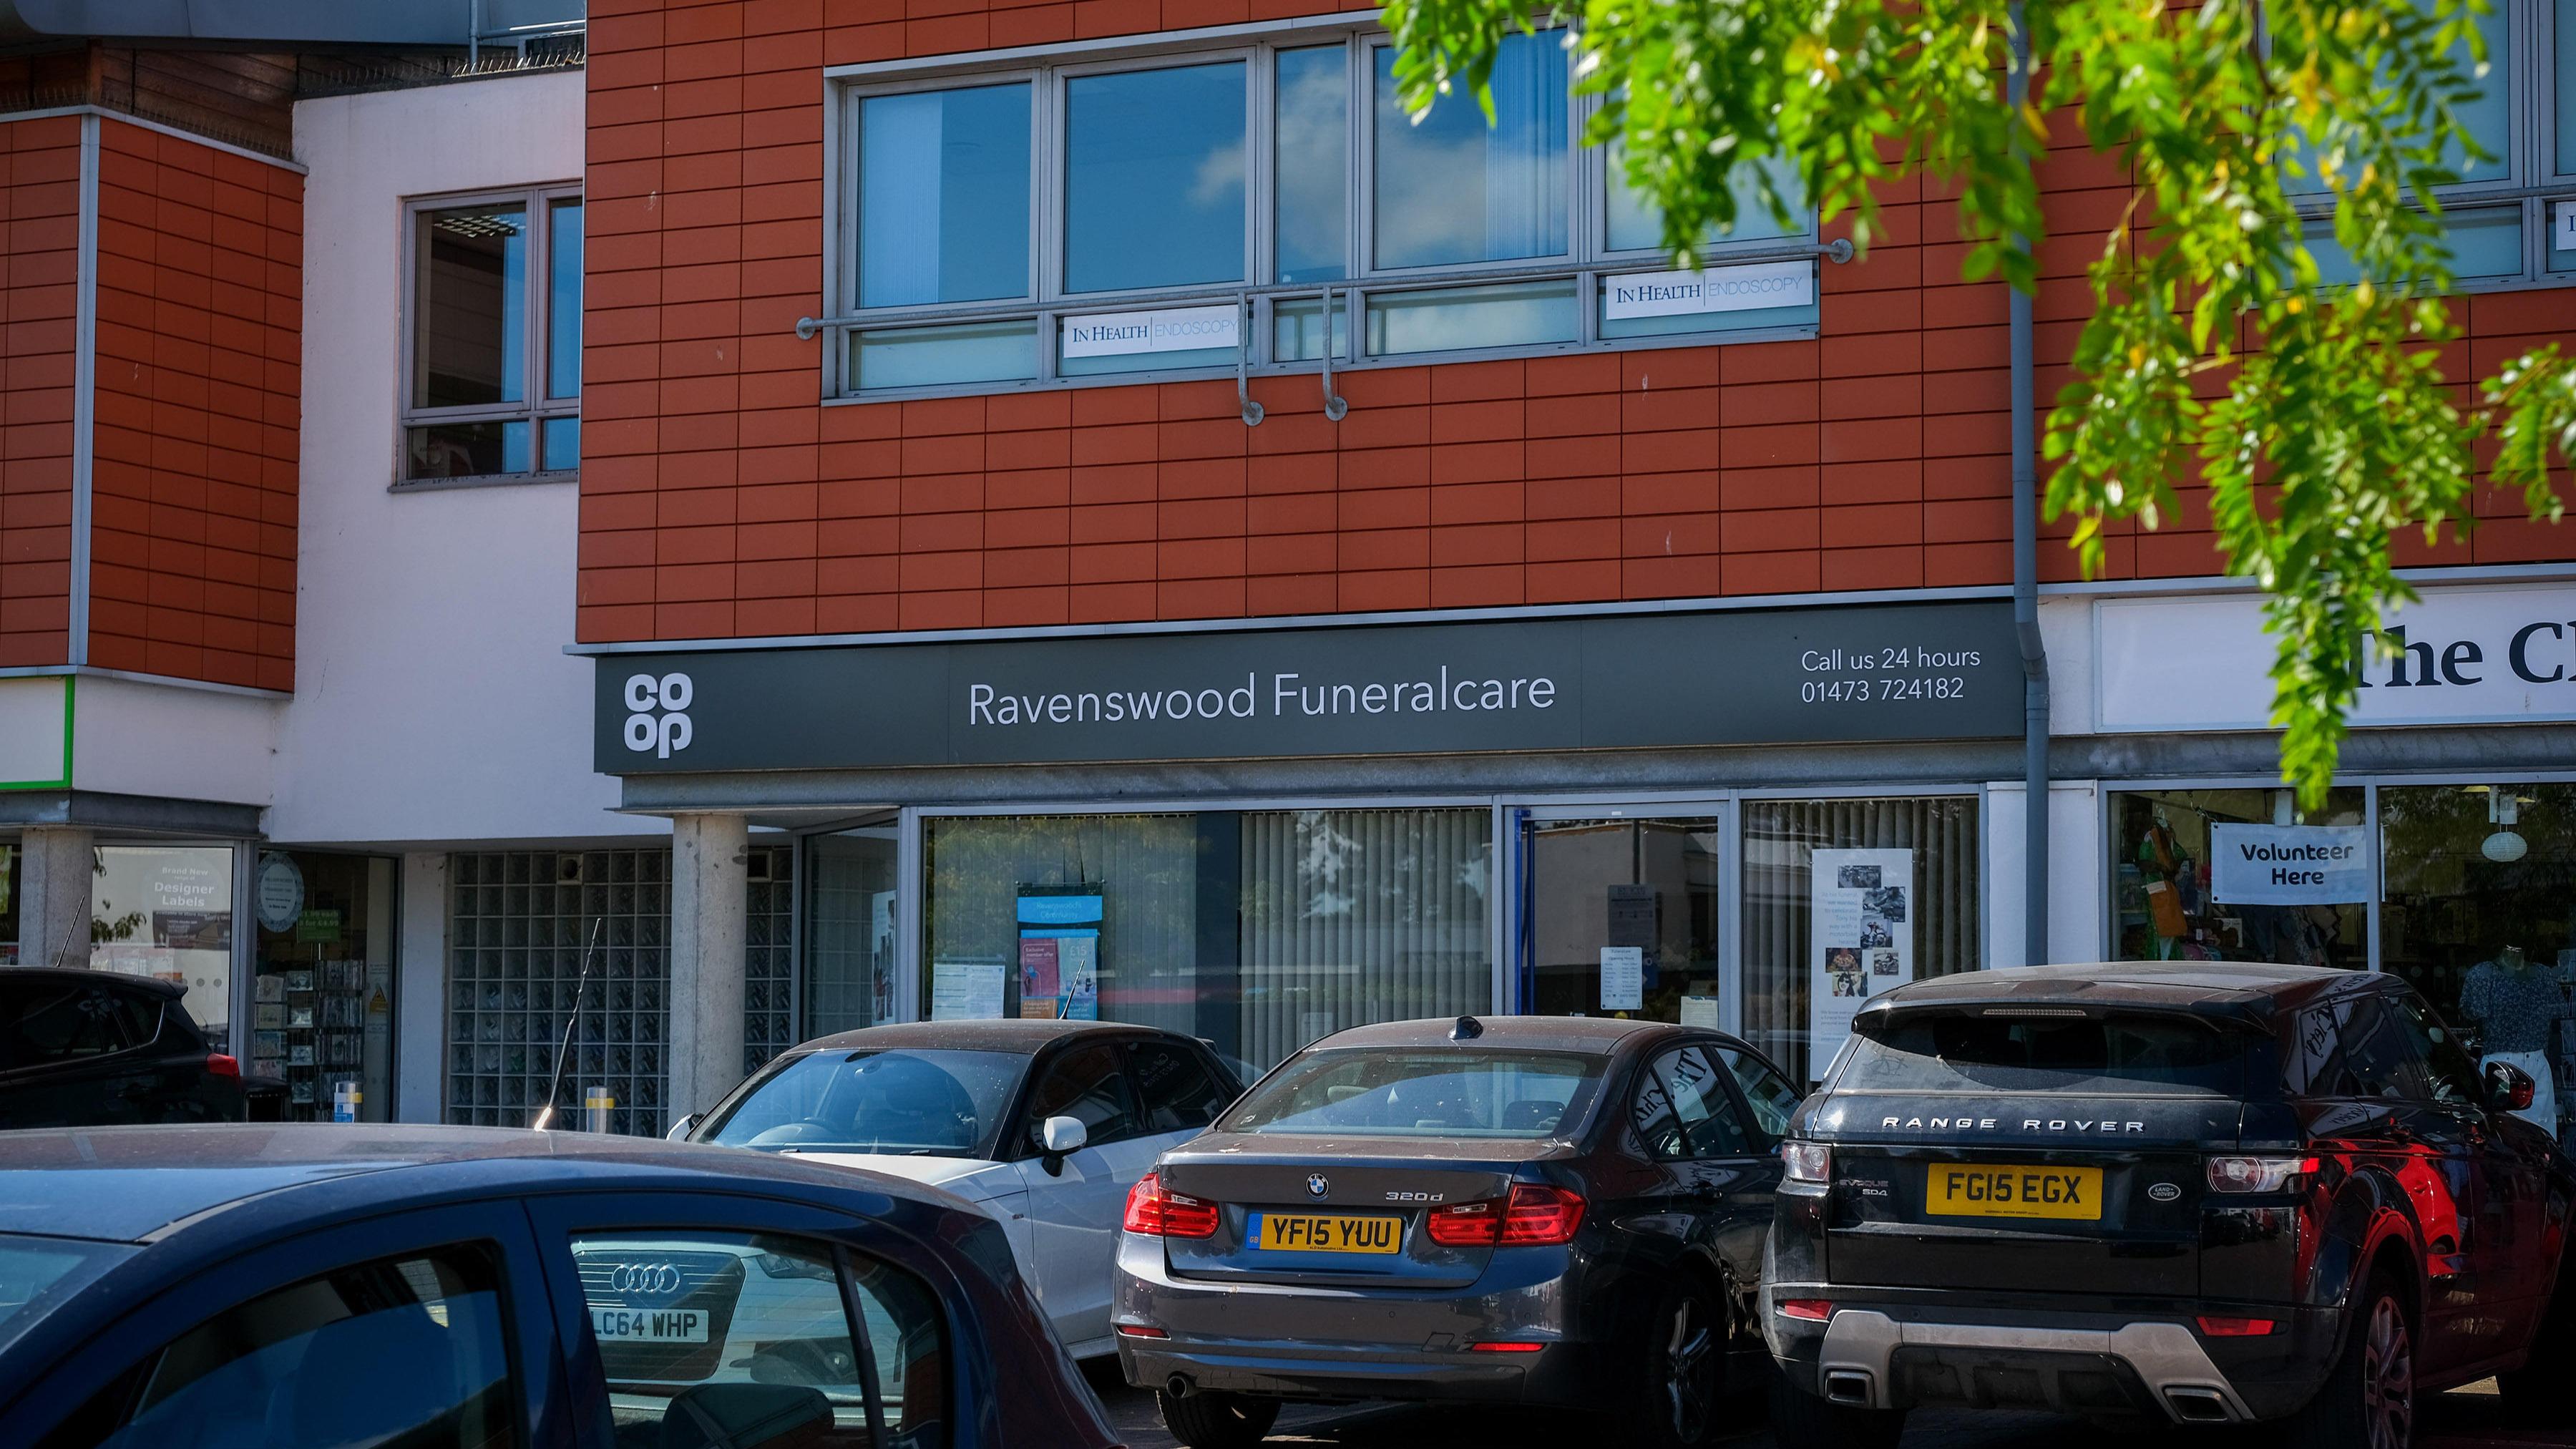 Images Ravenswood Funeralcare